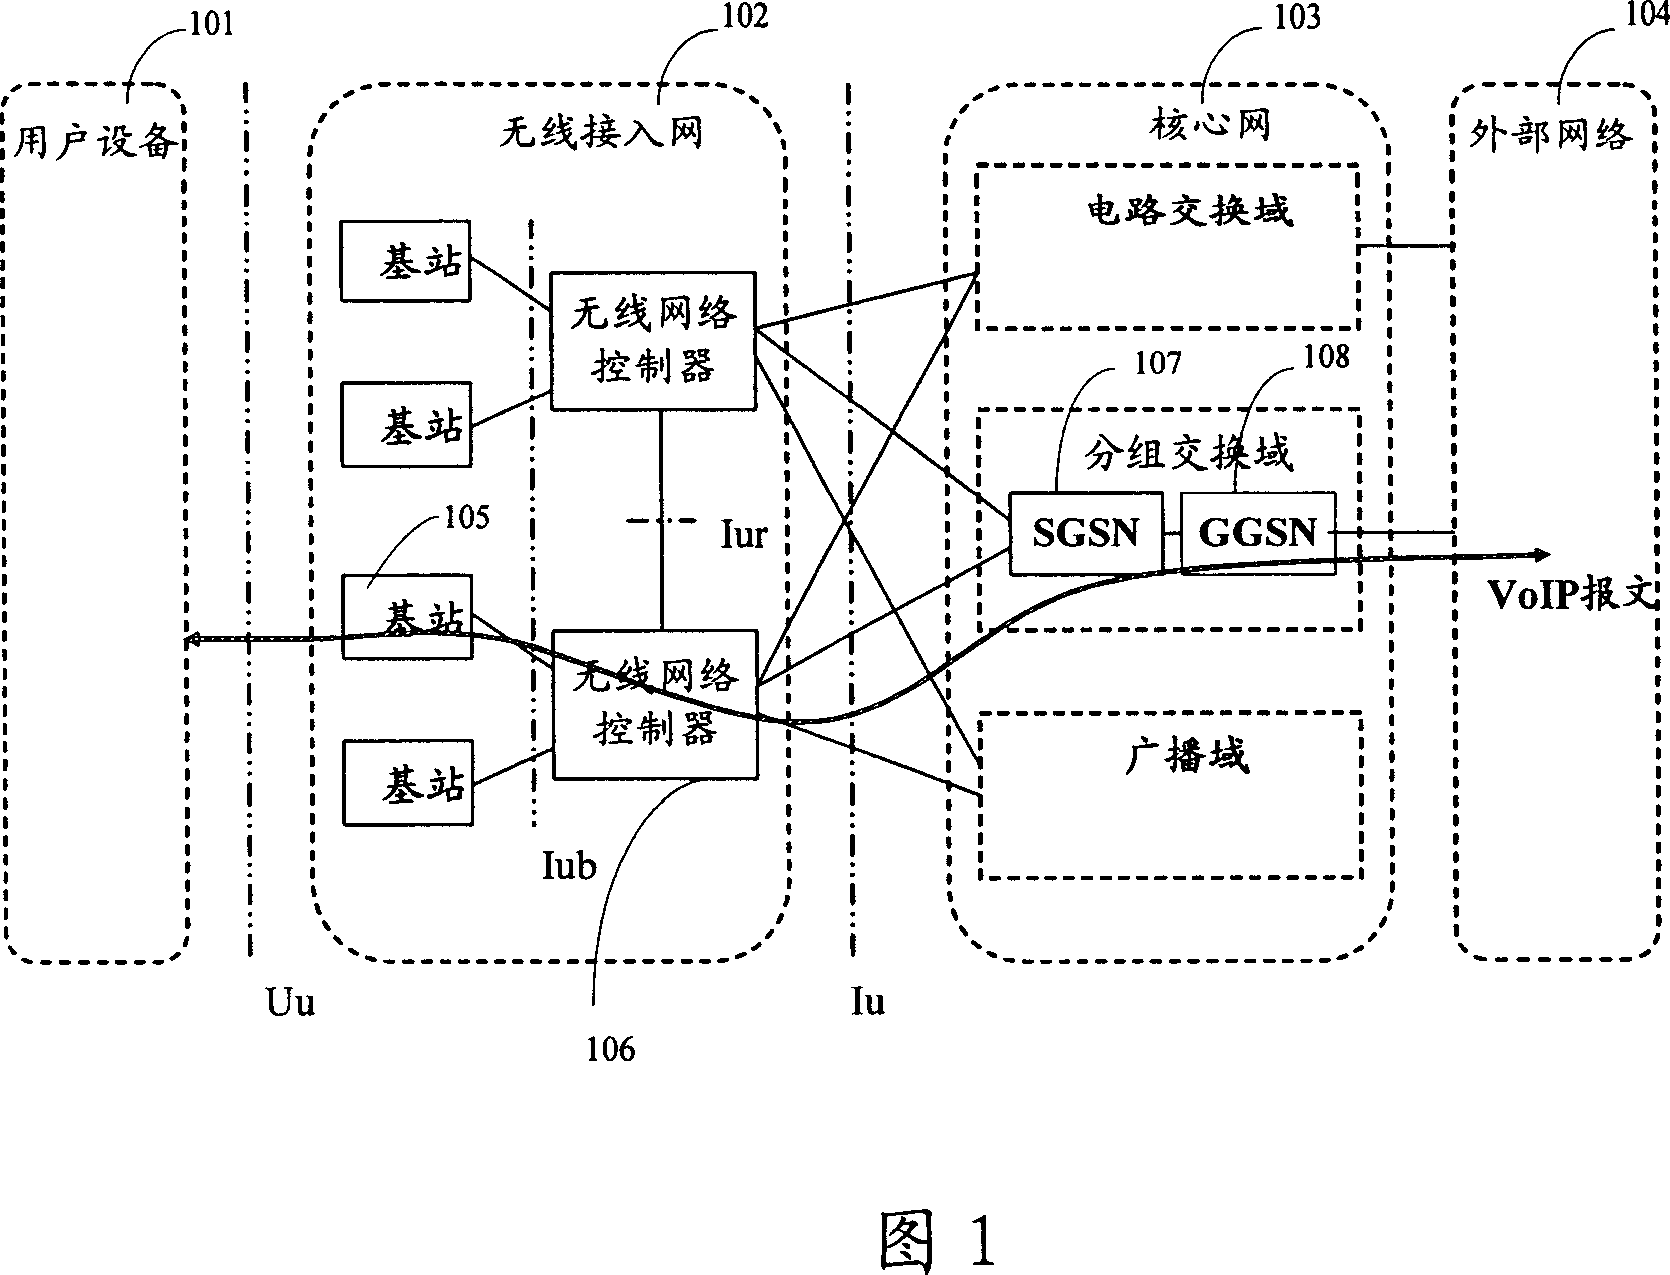 A method for loading and transferring packet voice